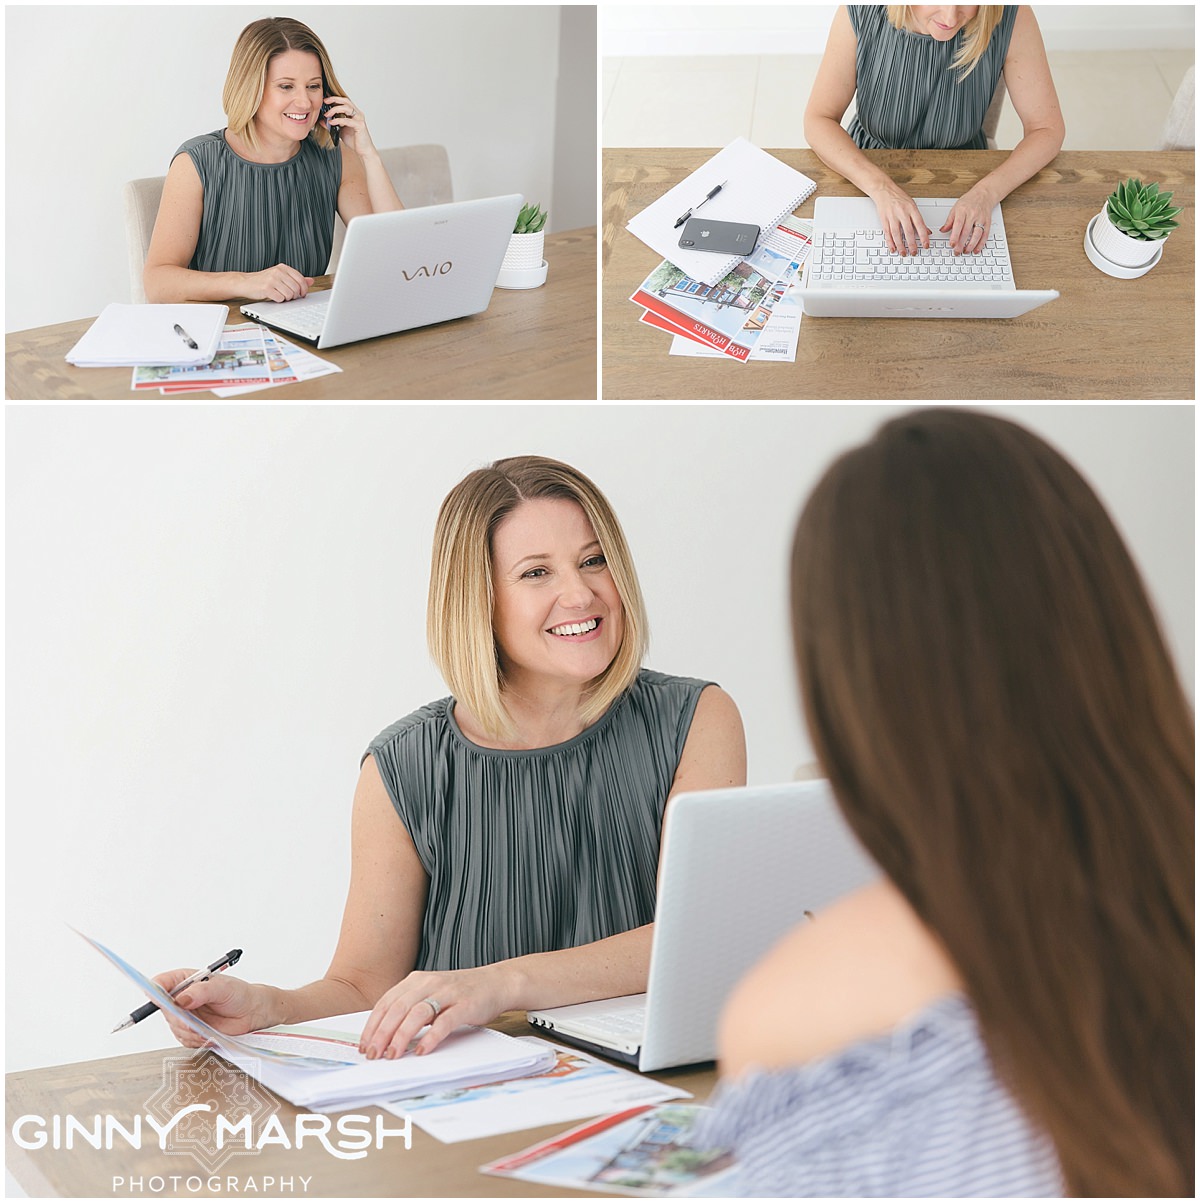 A Personal Branding Shoot for Charlotte: An Arbonne Consultant & Mortgage Advisor.